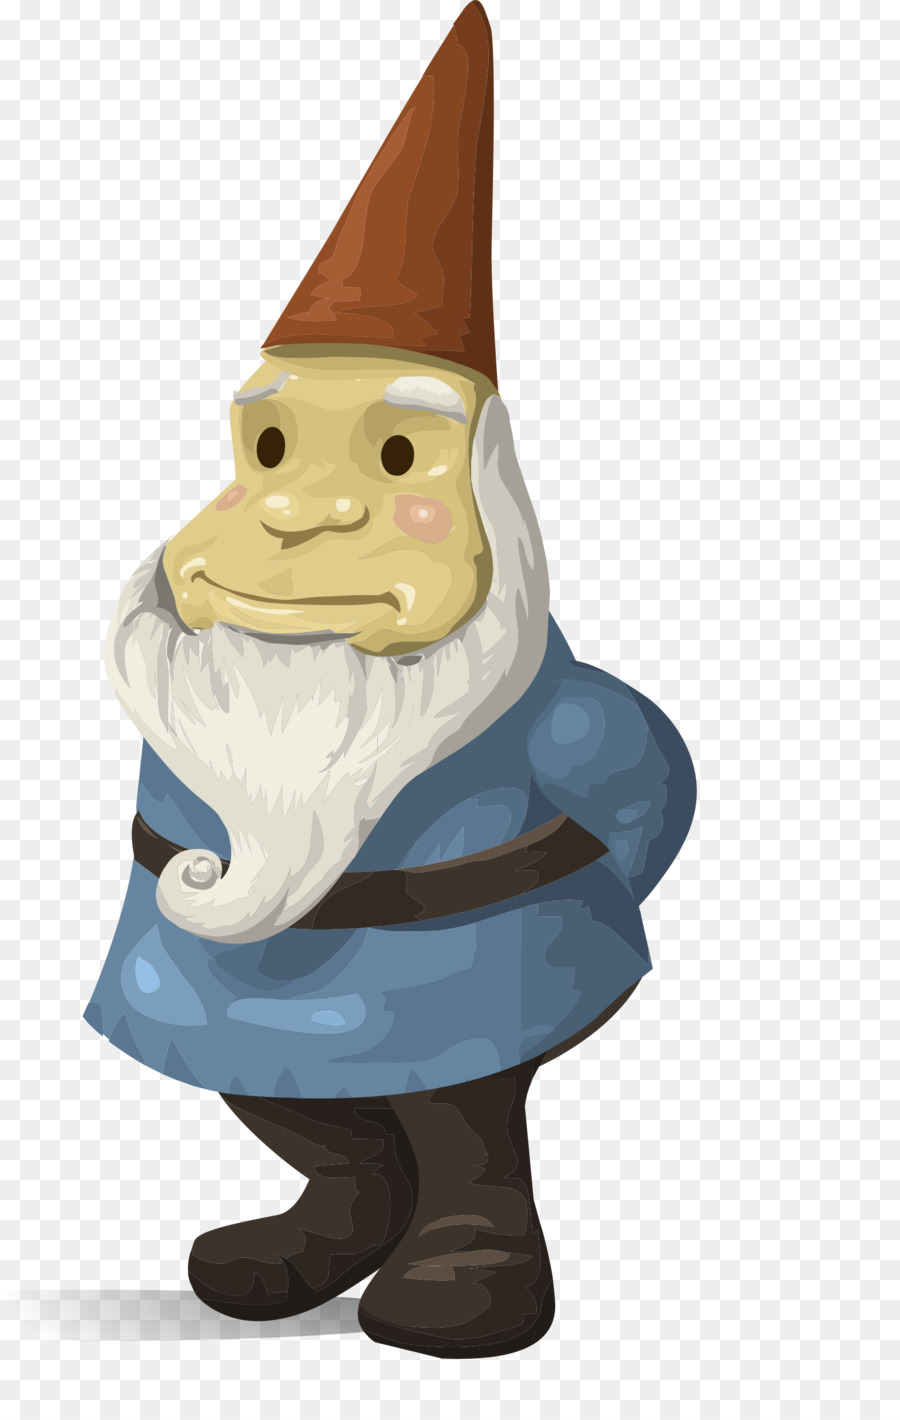 Garden gnome Clip art - Dwarf png download - 1532*2400 - Free Transparent Garden Gnome png Download.